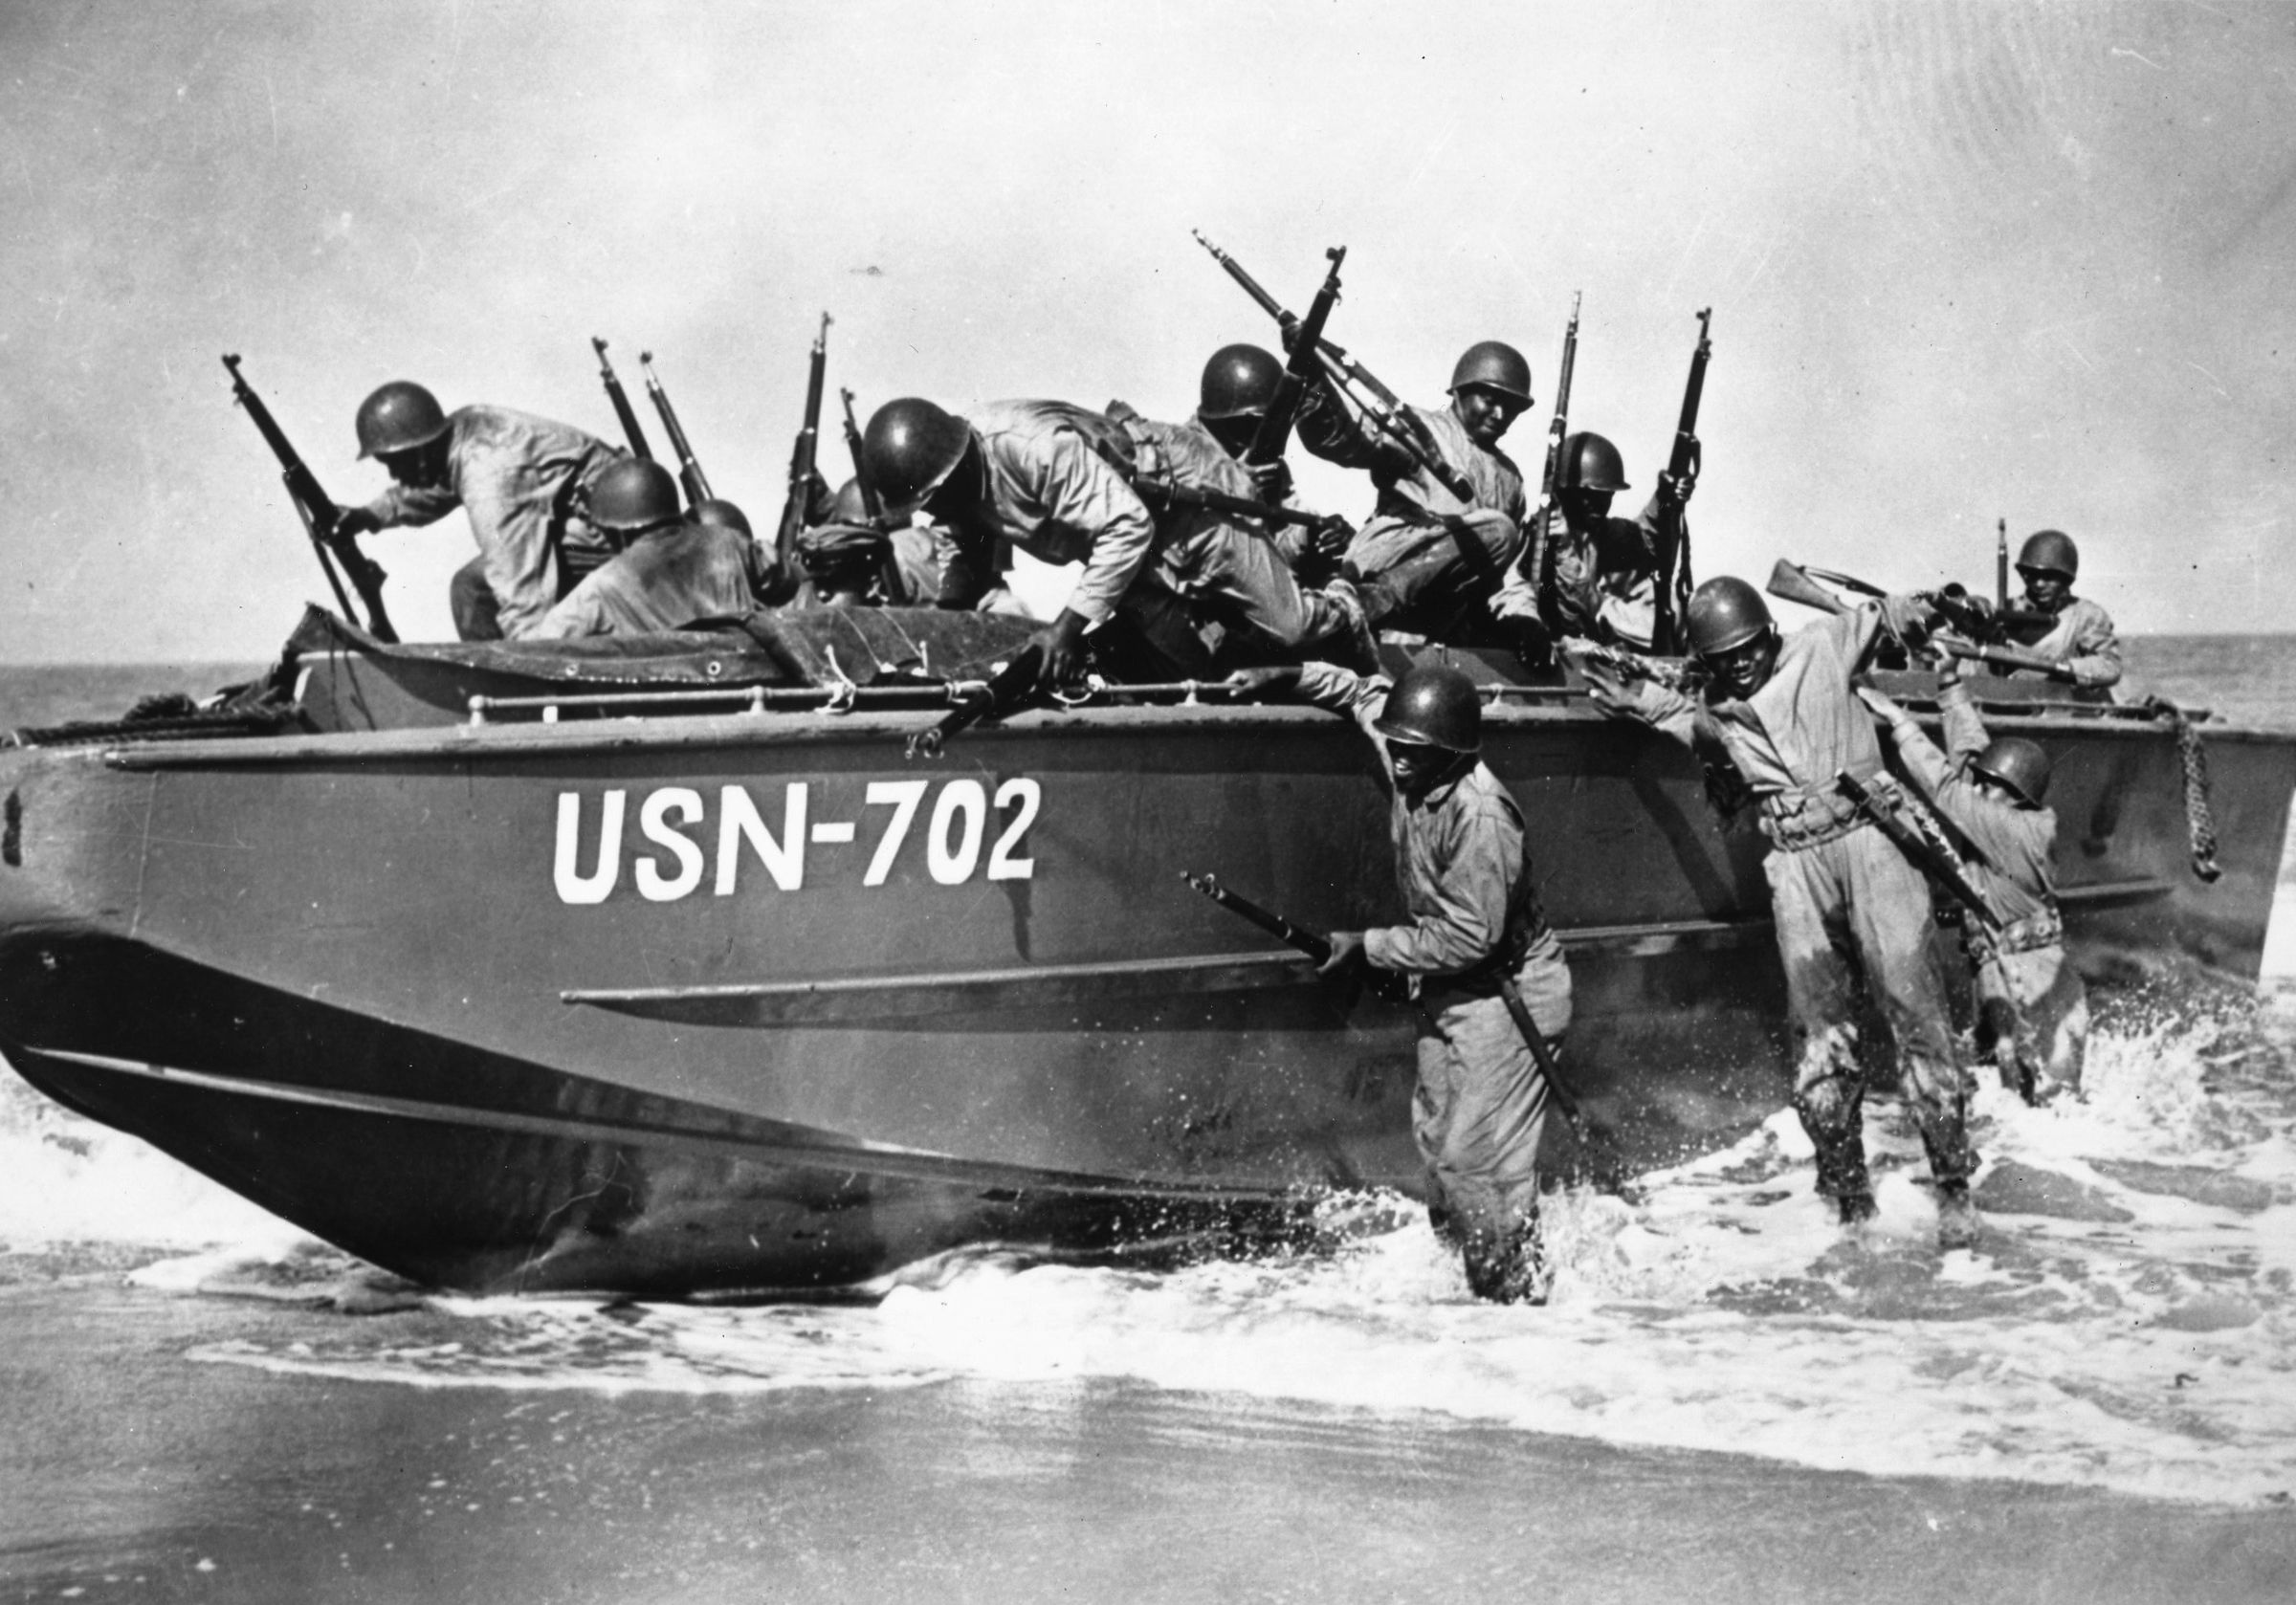 Members of an all-black Seabee battalion practice disembarking from an LCP(L) (Landing Craft Personnel, Large), December 1942.